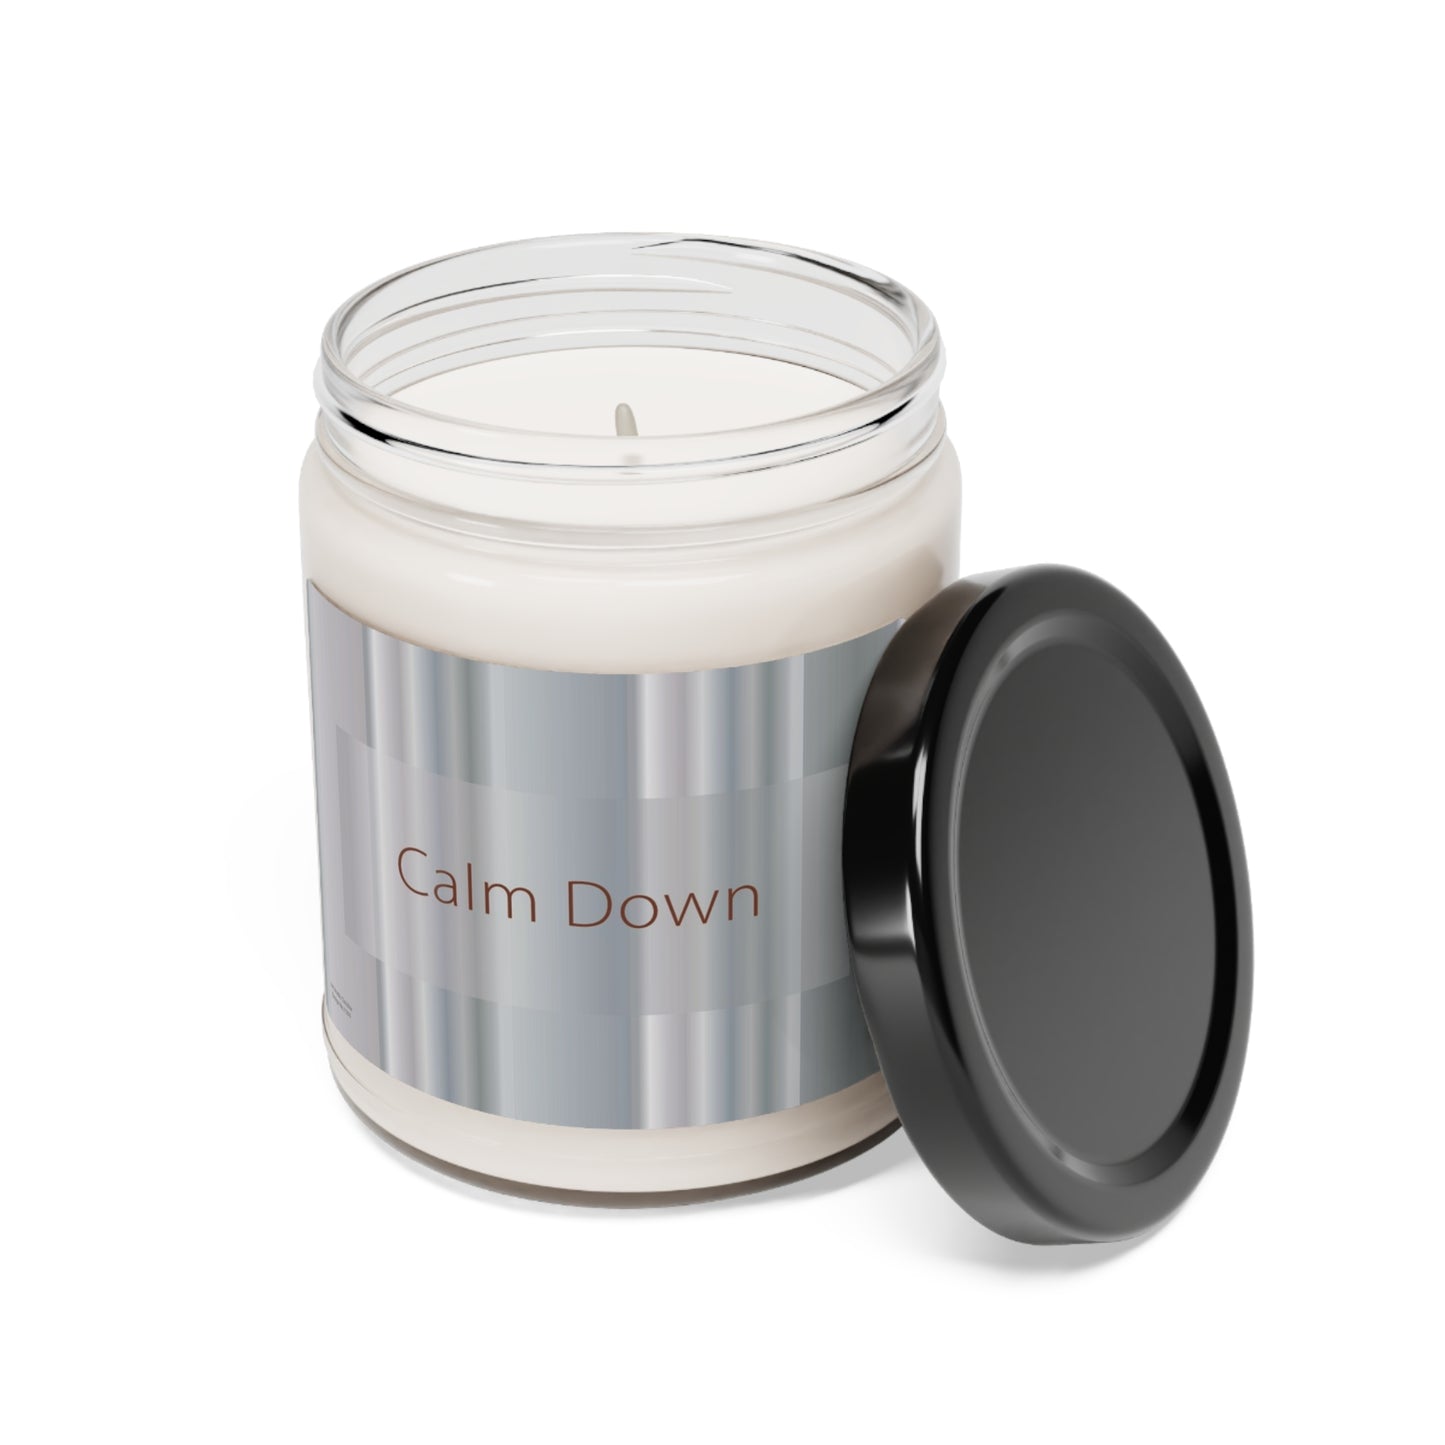 Scented Soy Candle, 9oz Calm Down - Design No.1500